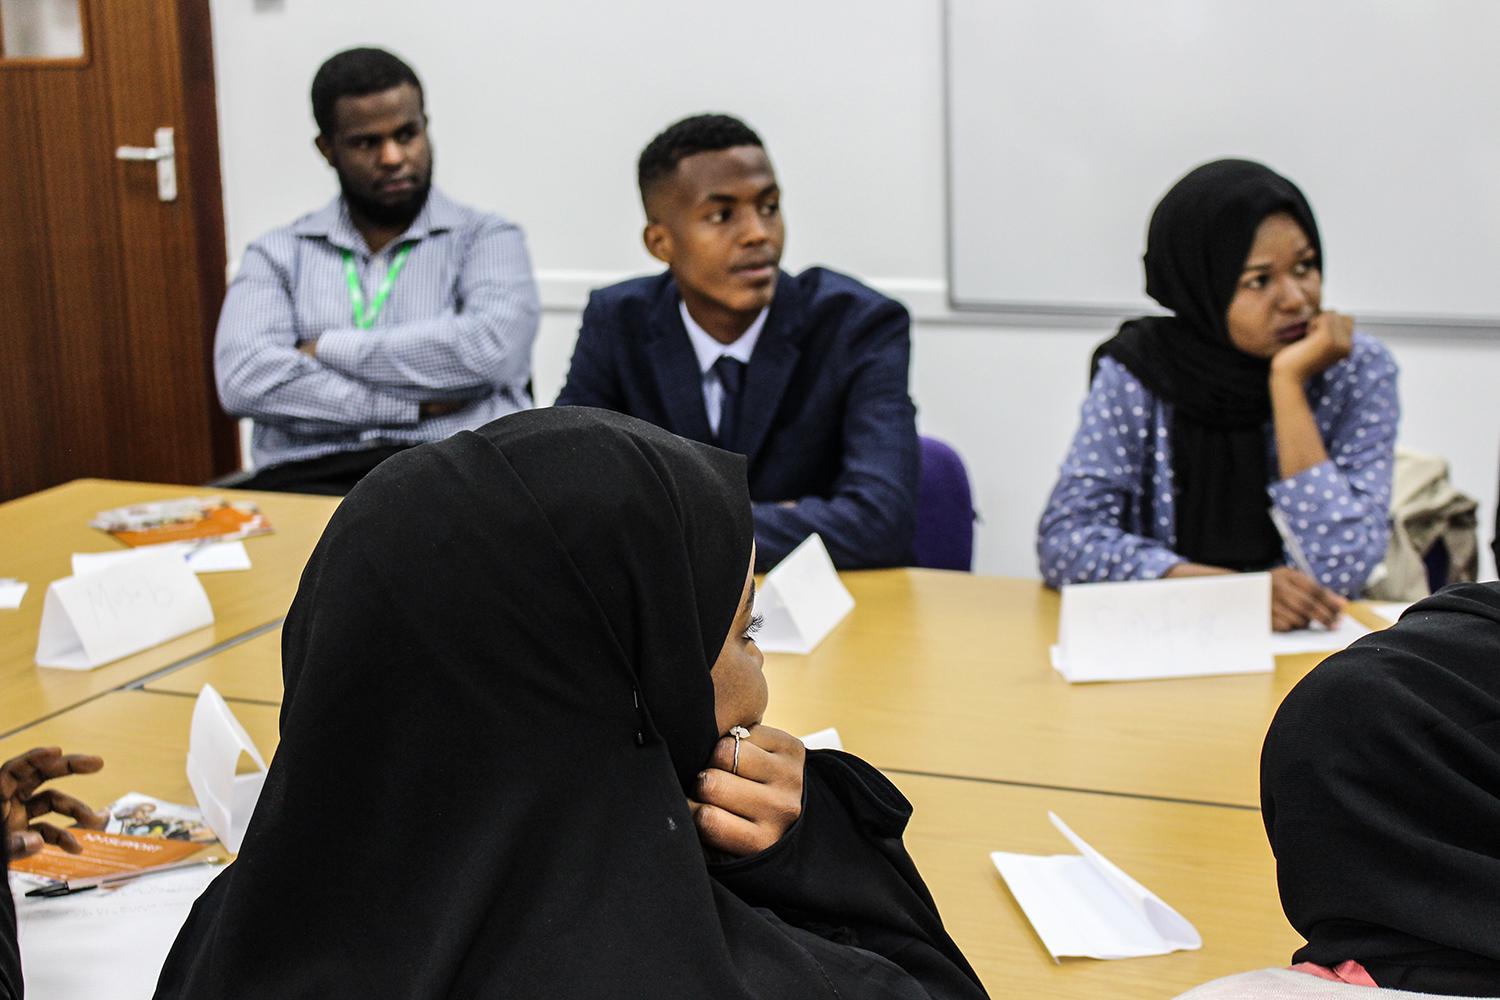 young refugee learners in Bristol